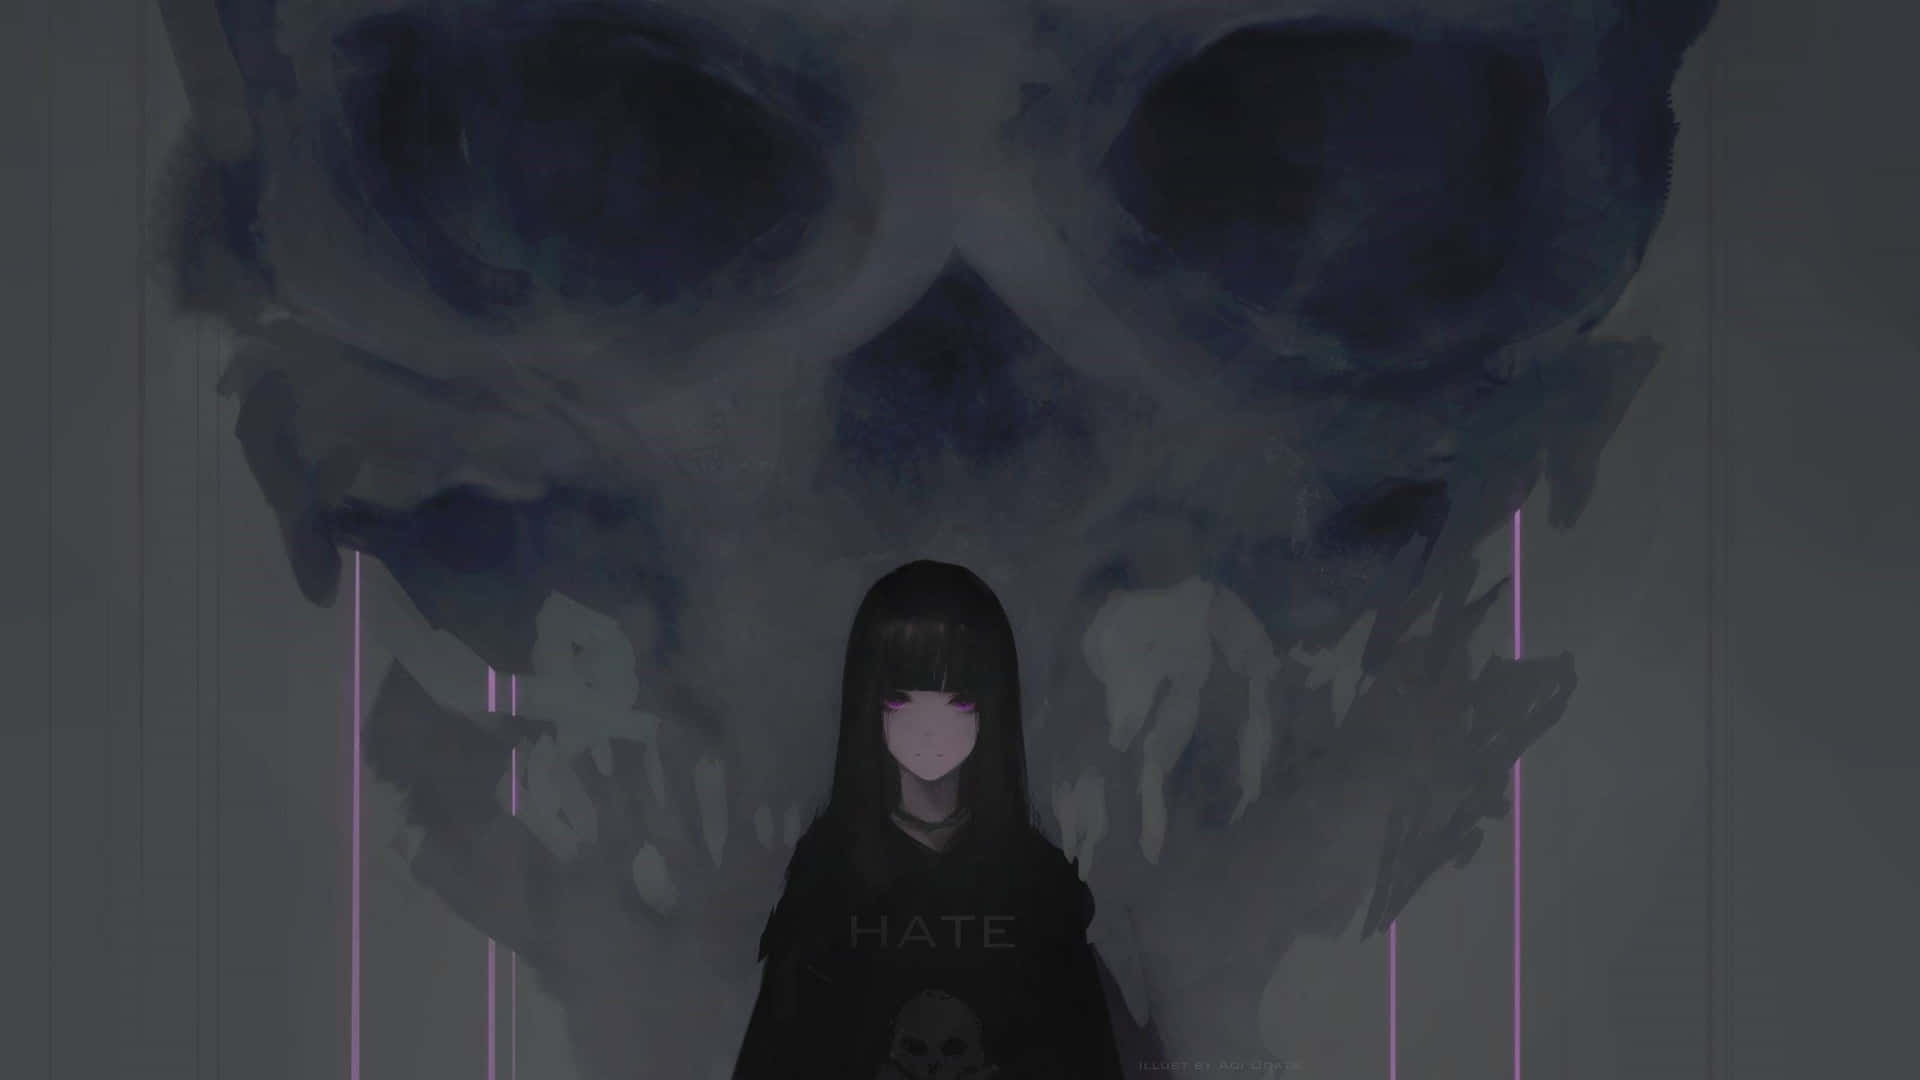 Create a dreamy black and anime aesthetic with your PC Wallpaper